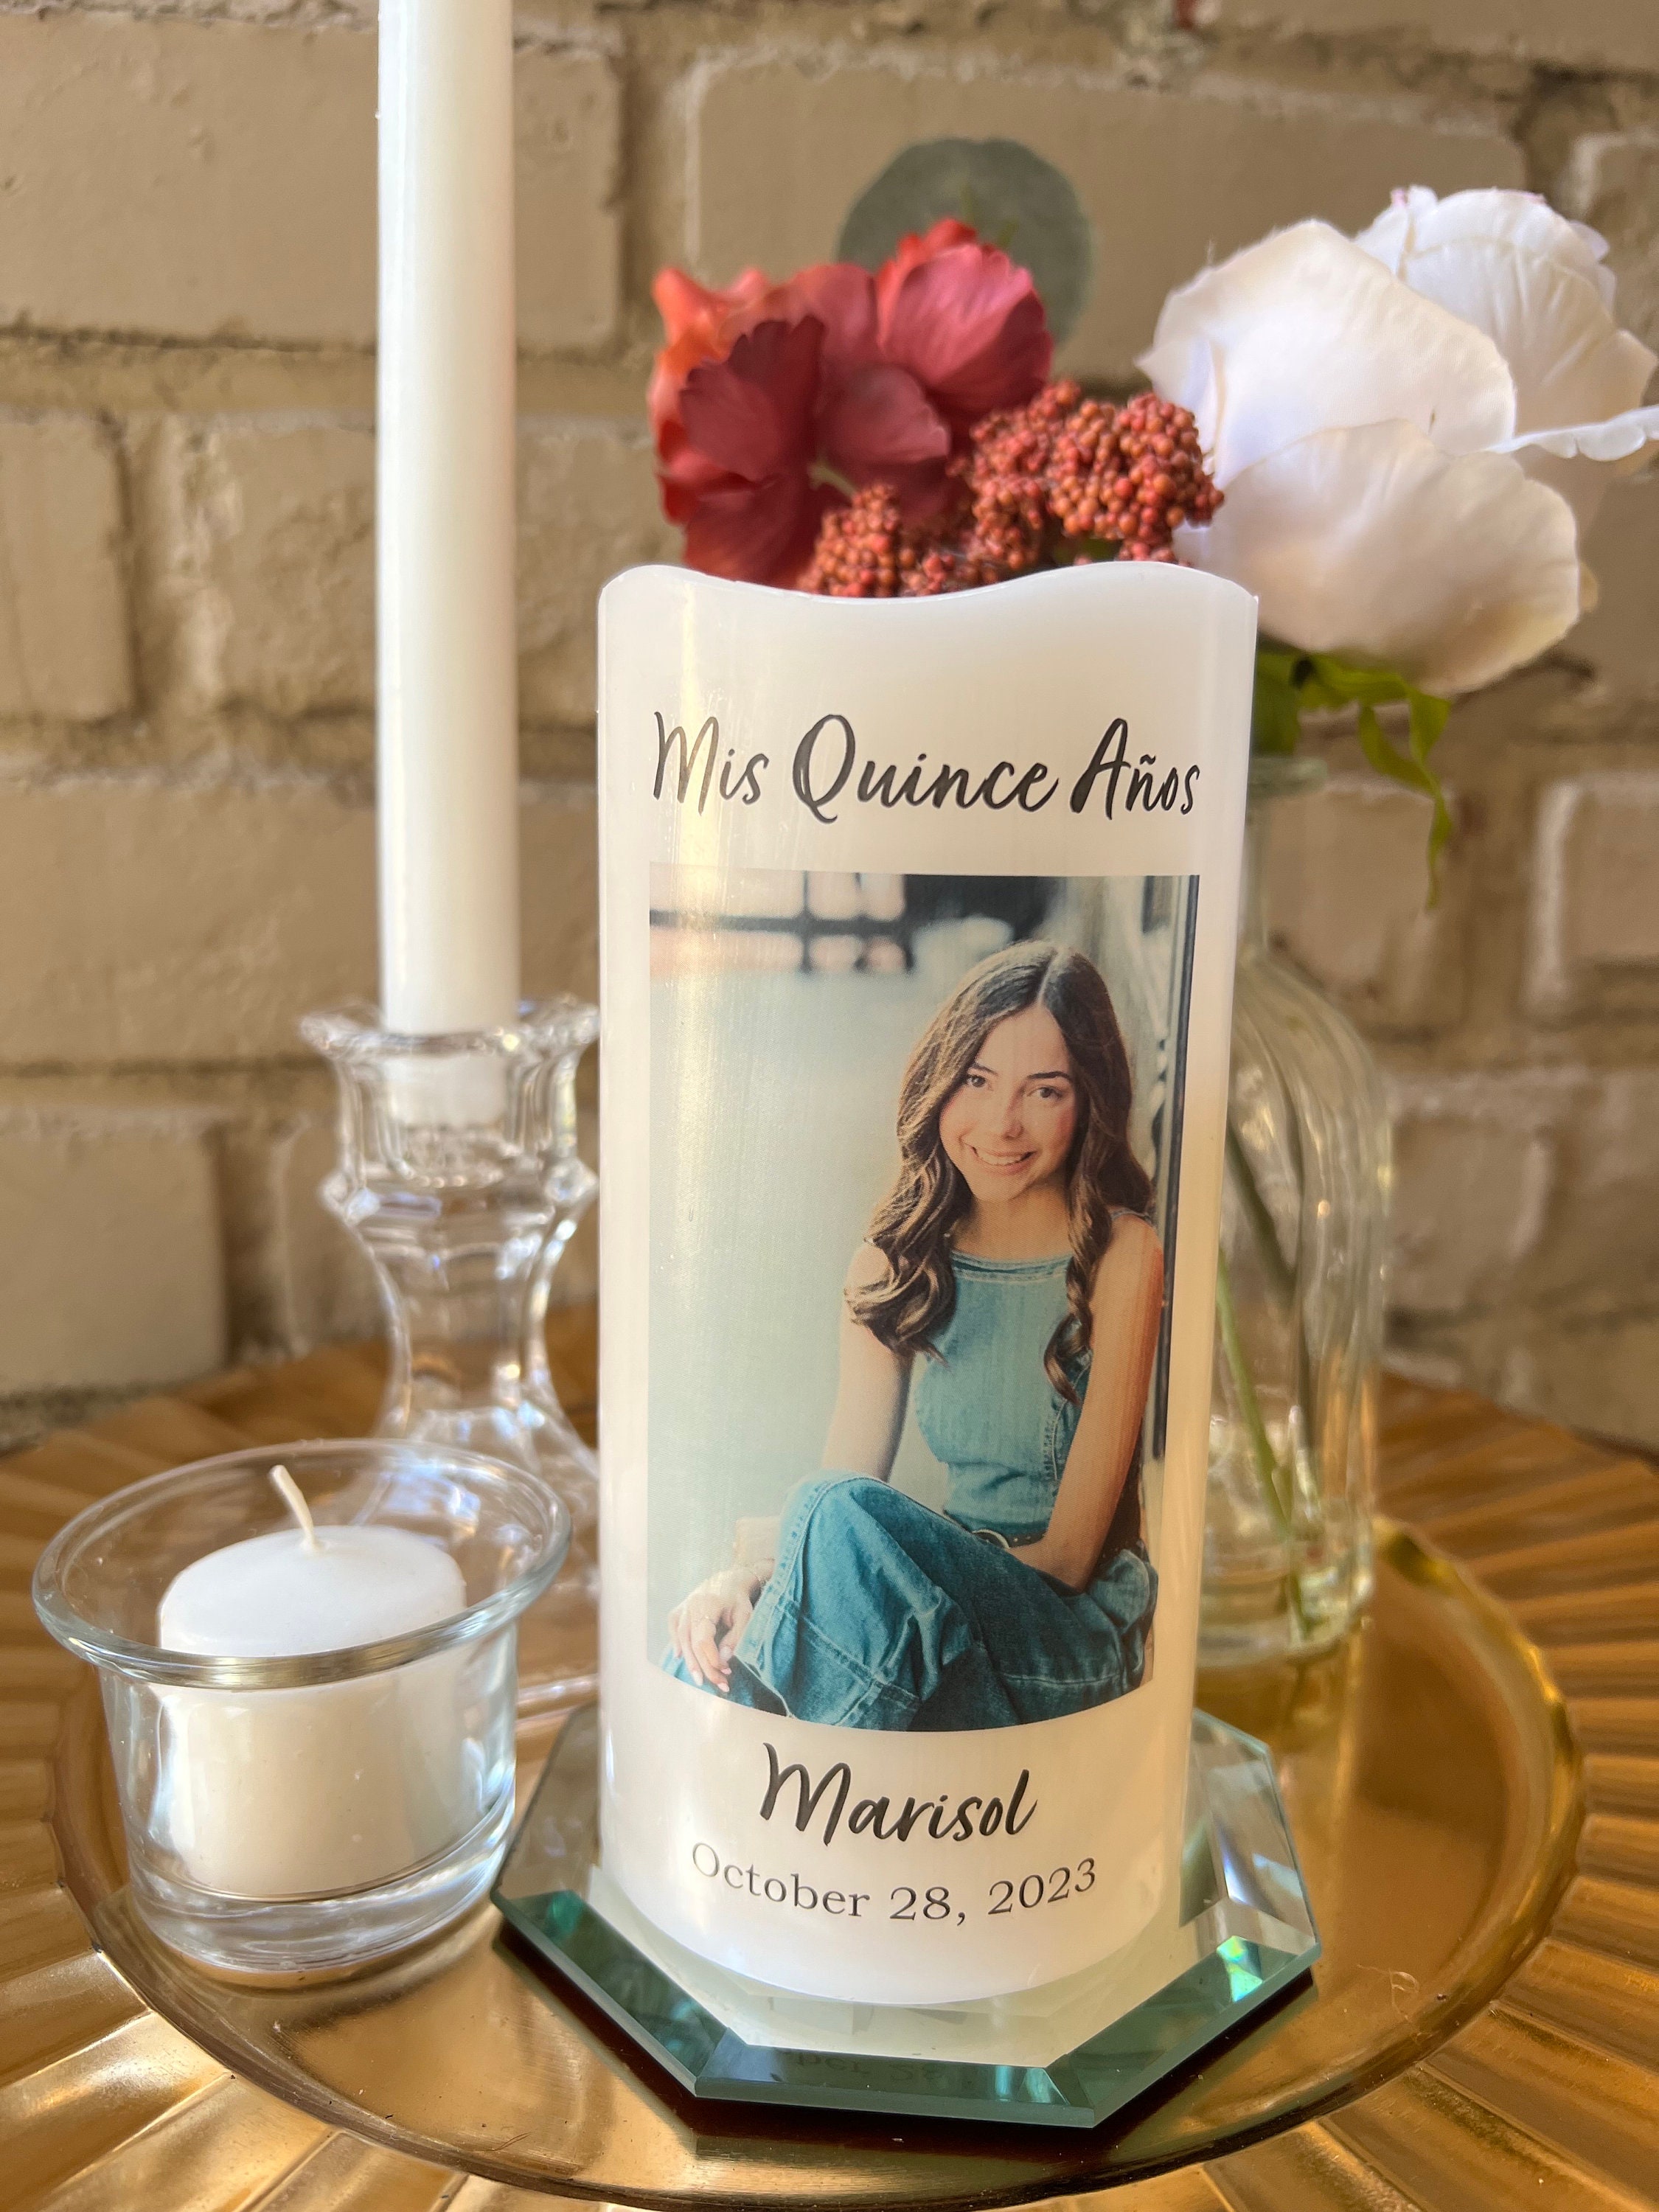 Green 15 candle ceremony for quinceanera / quinceanera-decor